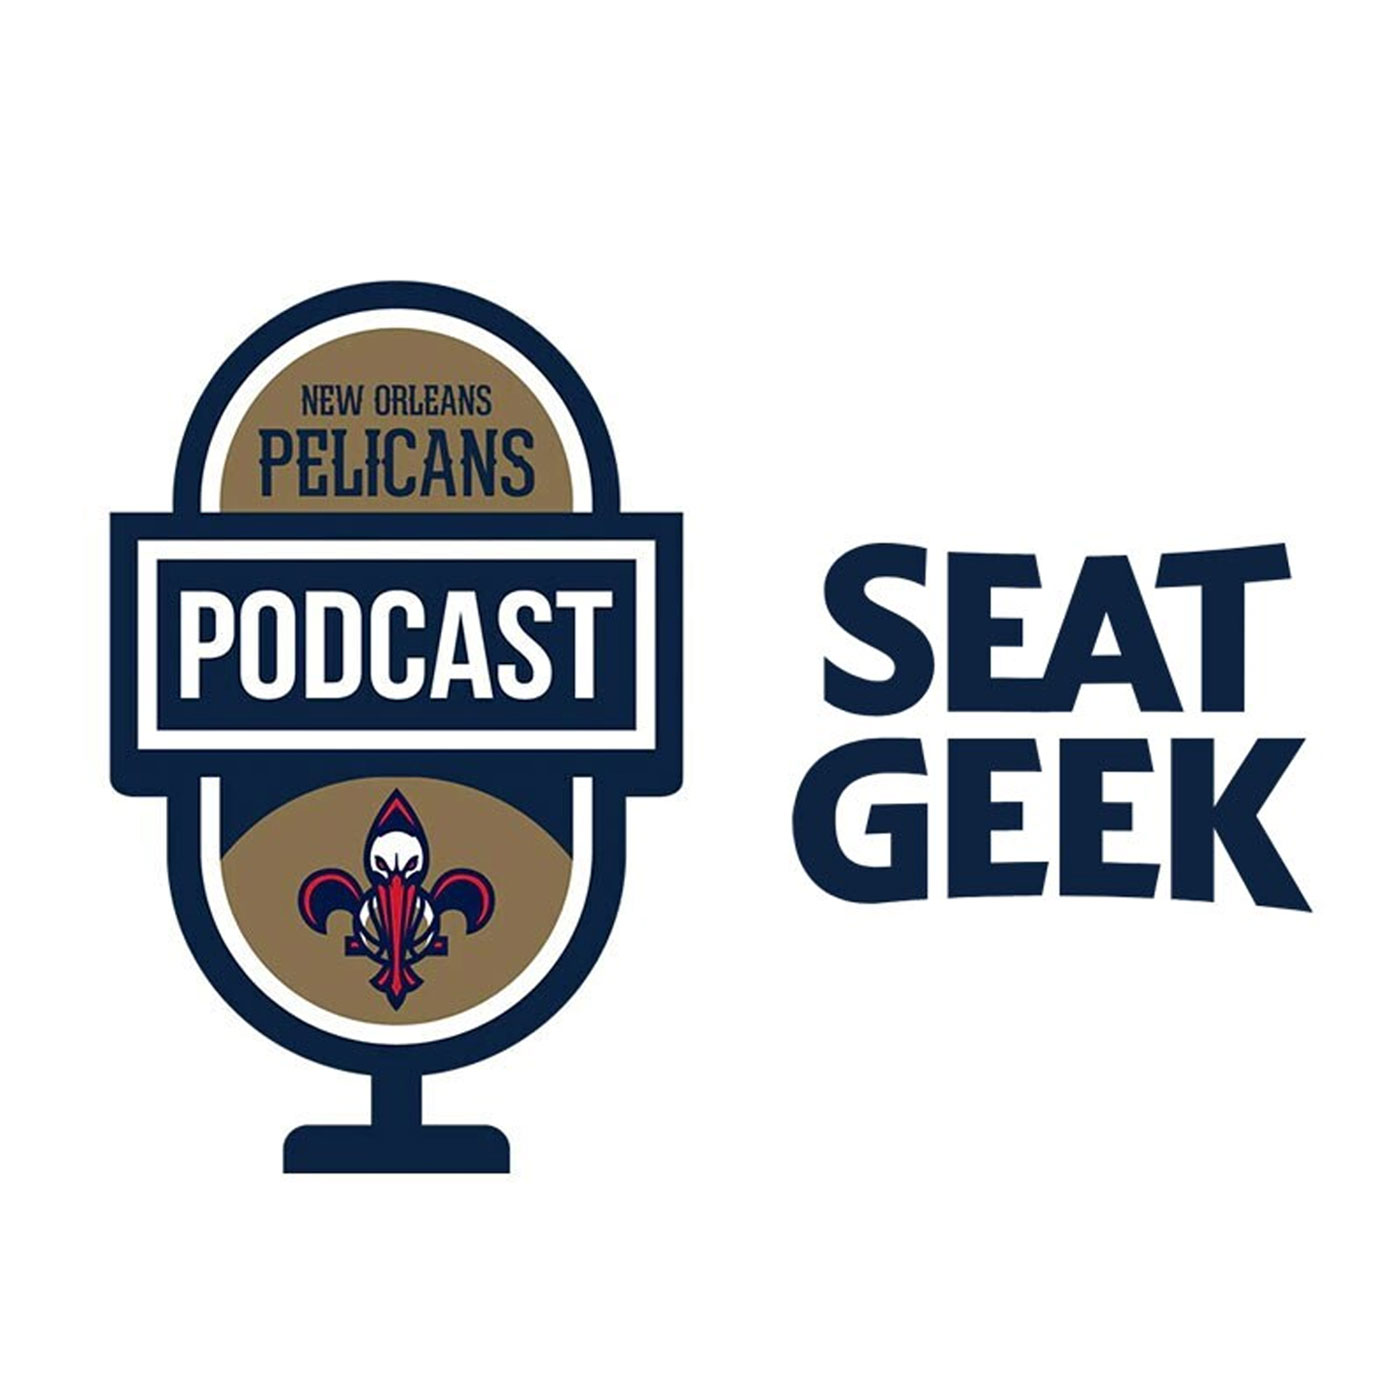 Noah Eagle on the New Orleans Pelicans Podcast presented by SeatGeek - April 15, 2022